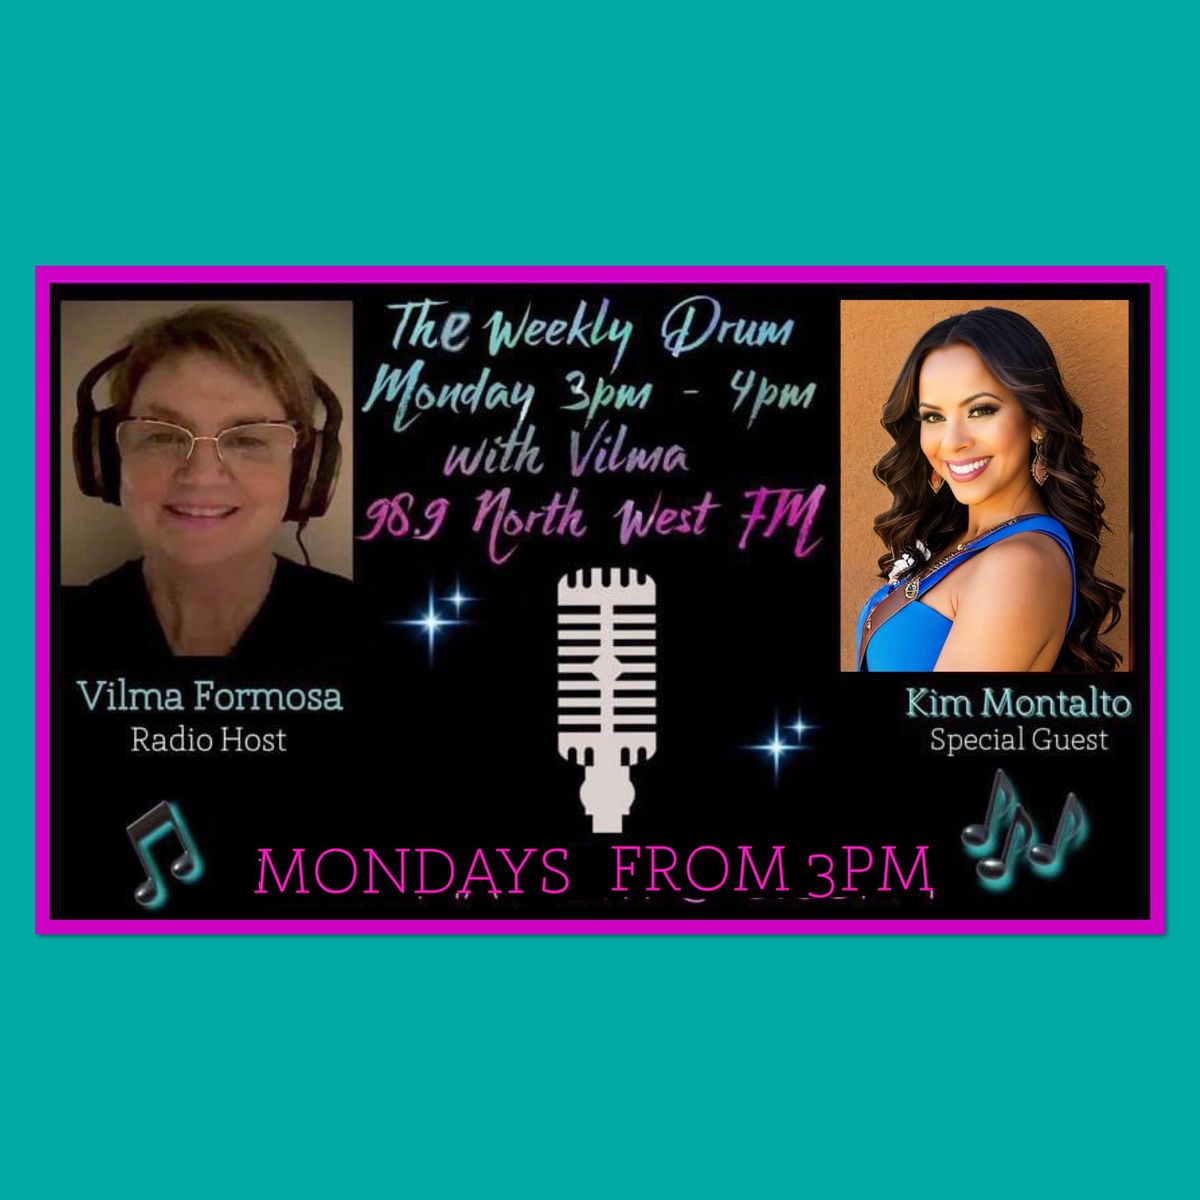 KIM MONTALTO special guest on THE WEEKLY DRUM